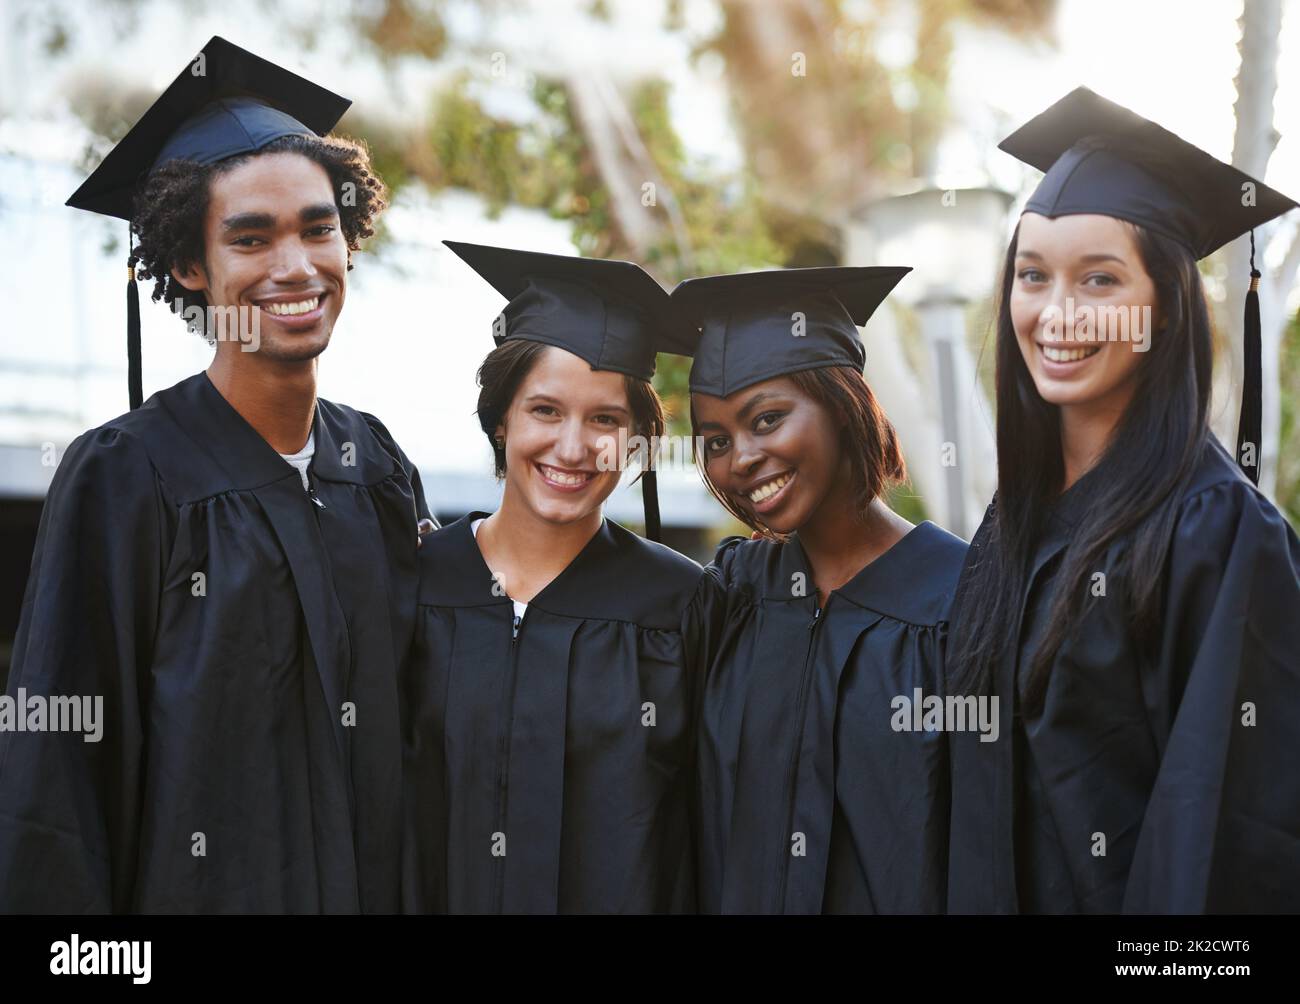 Theyve got a bright future ahead. A group of smiling college graduates standing together in cap and gown. Stock Photo